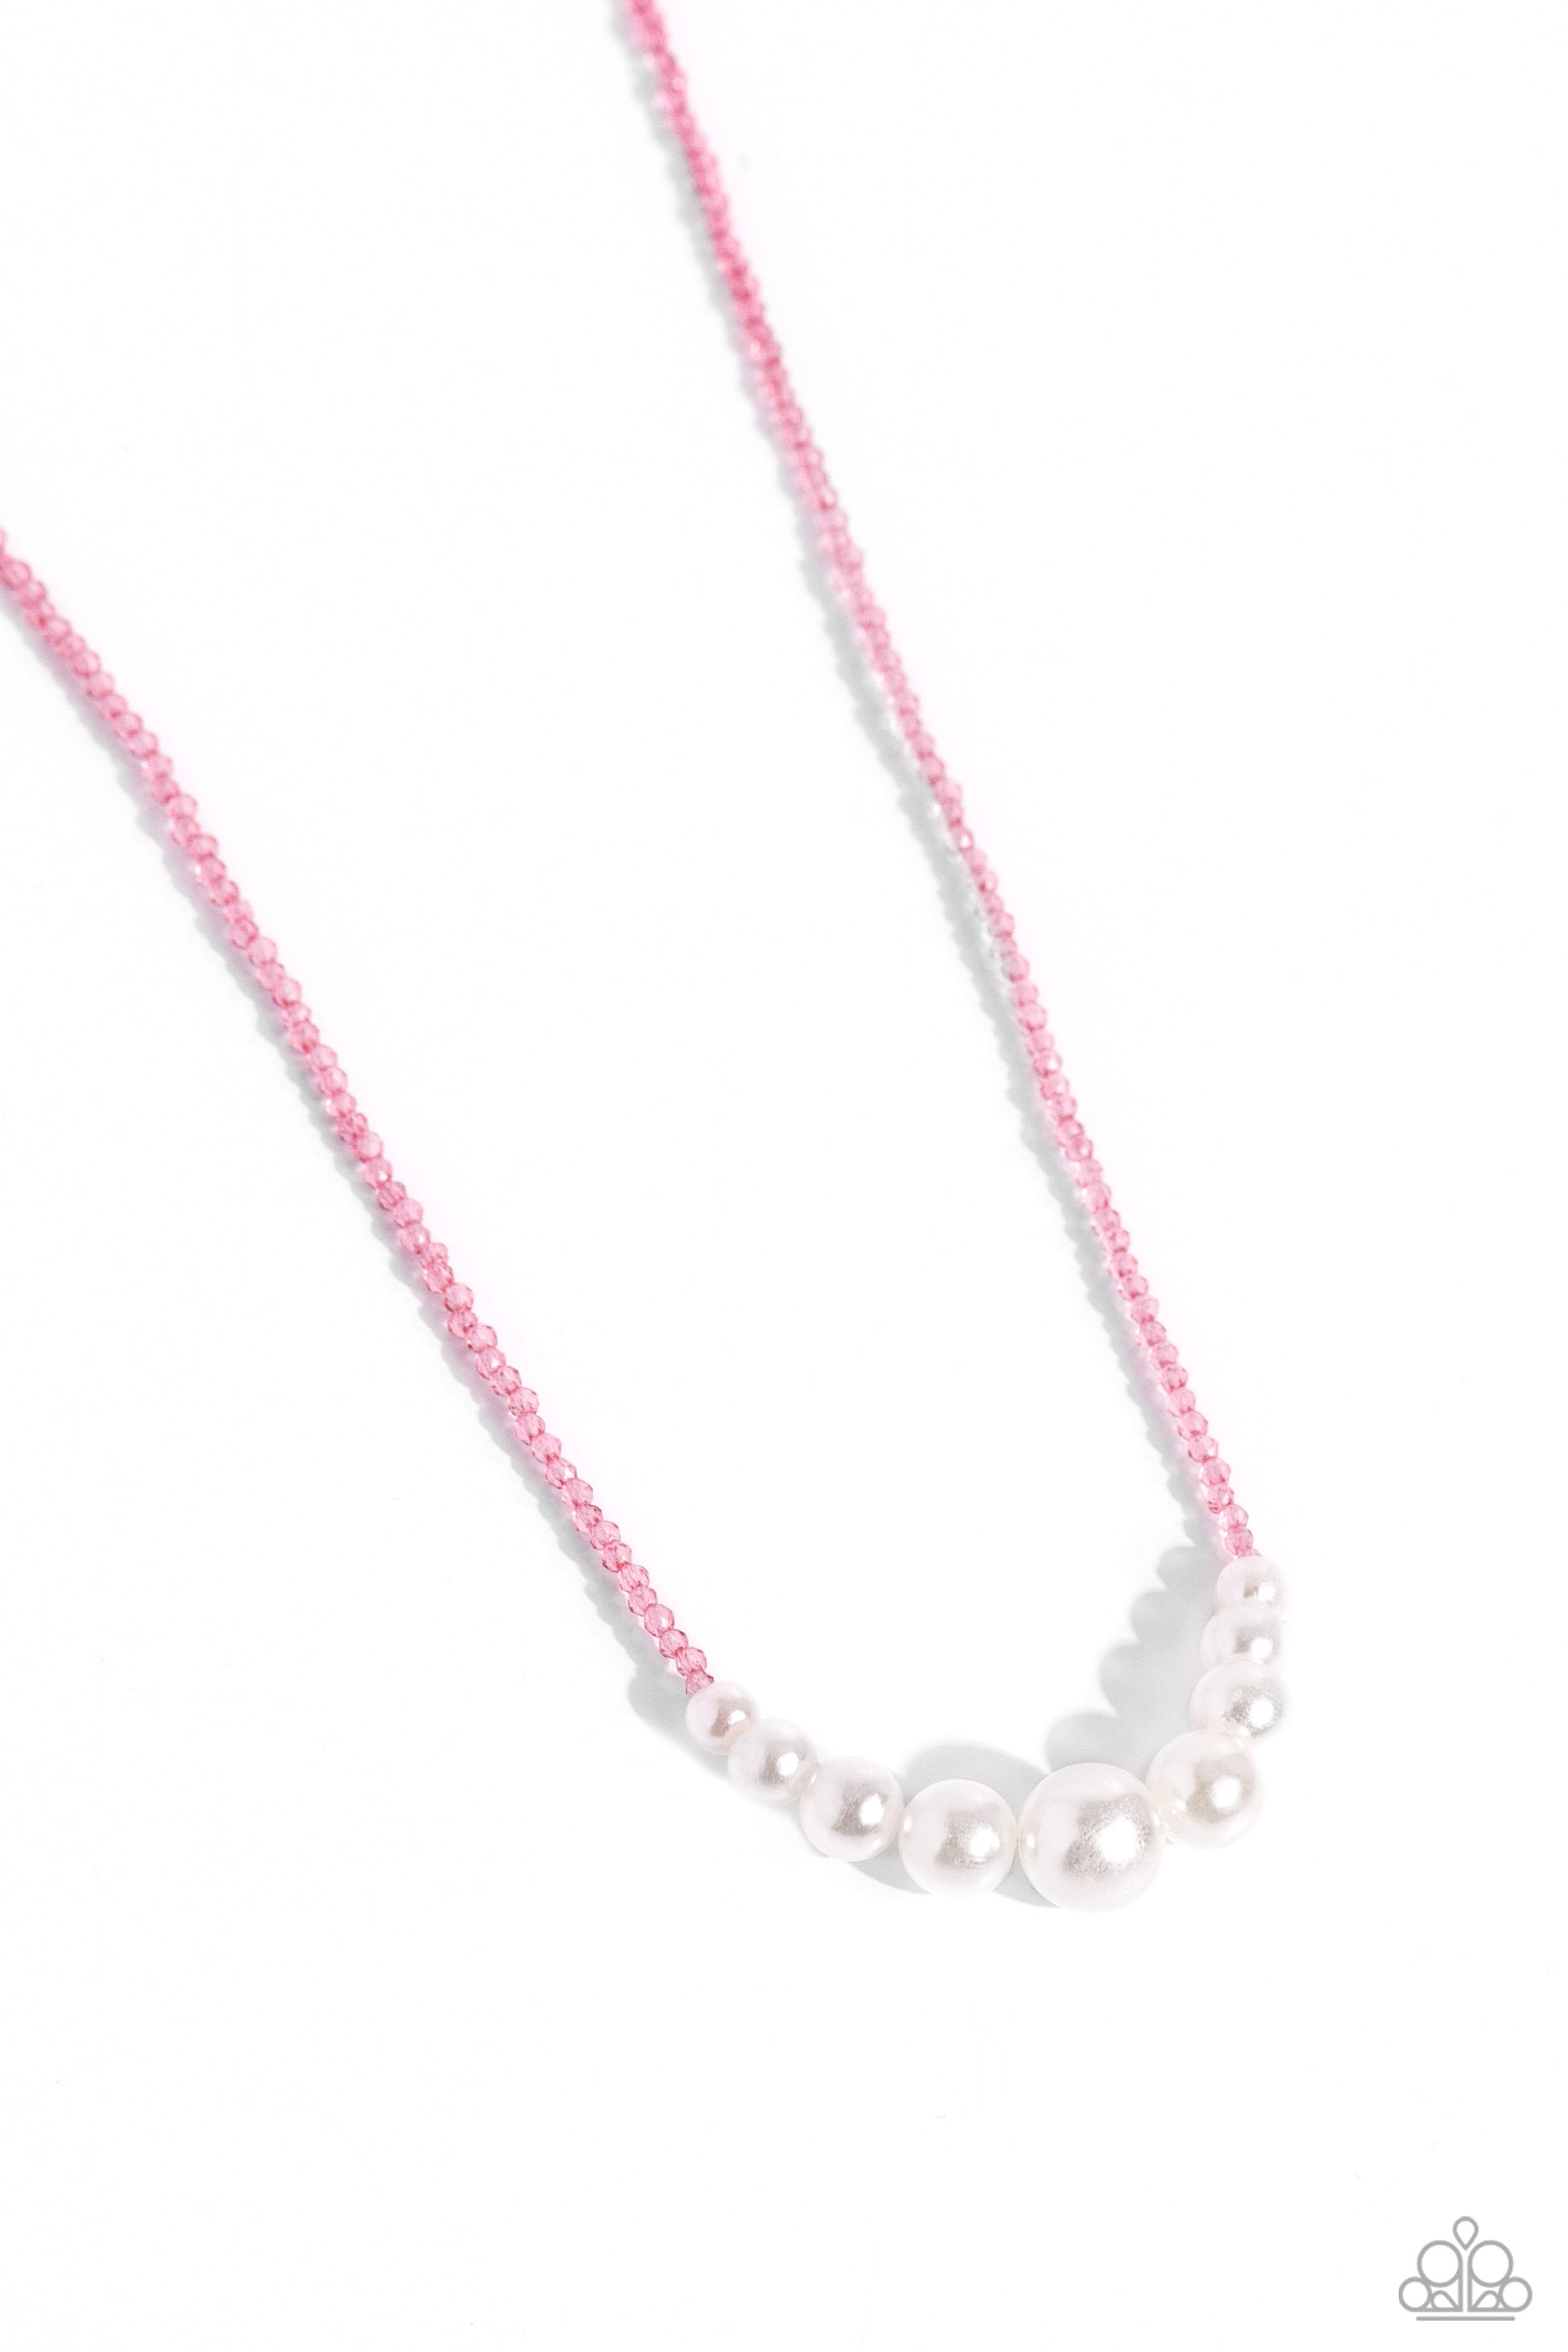 White Collar Whimsy - pink - Paparazzi necklace